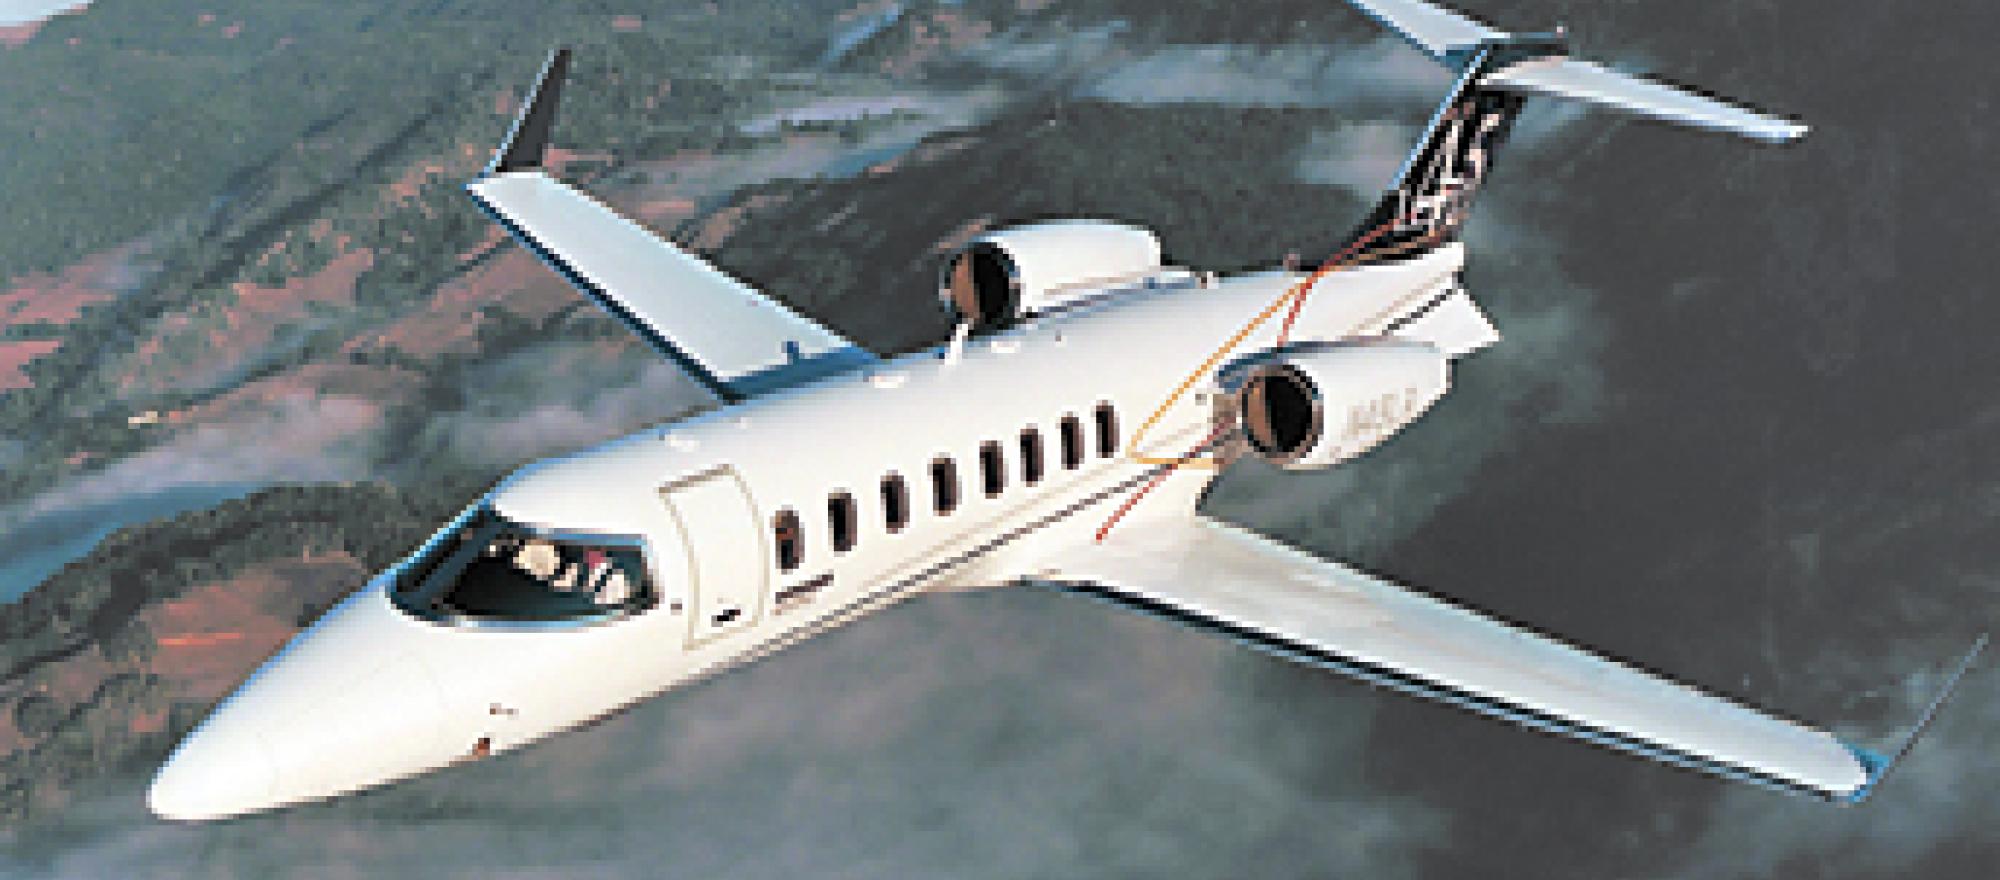 The Learjet 45 is a popular model, and inventory of this mid-sized jet has de